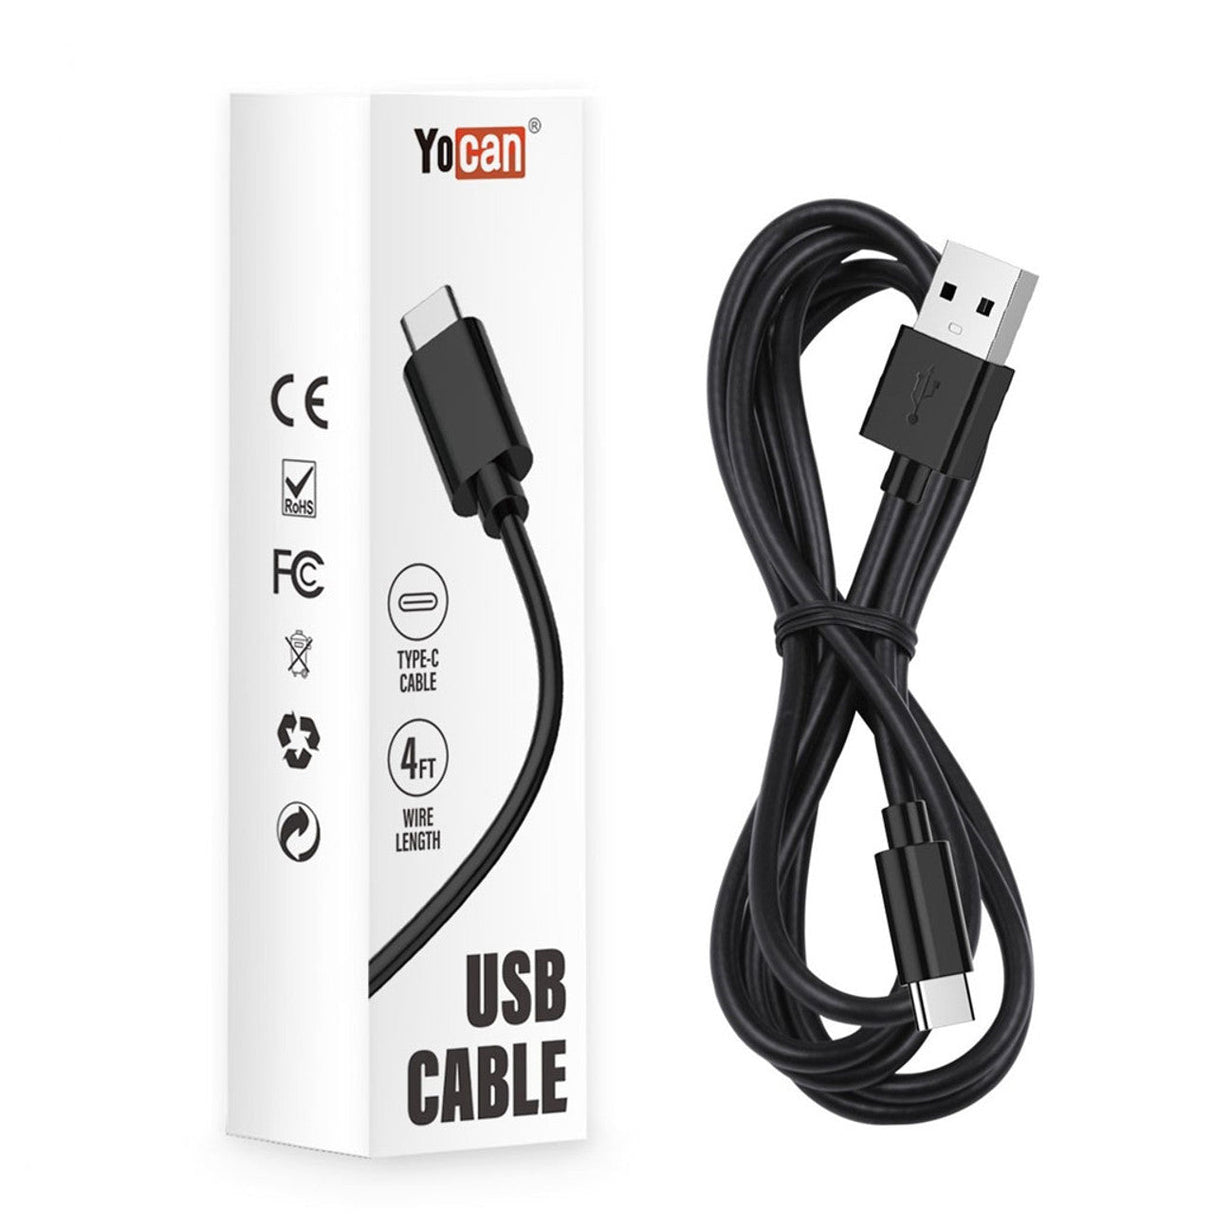 Yocan Type C Charge Cable 4ft - 10 Pack Display, Portable Black USB Cable for Vaporizers